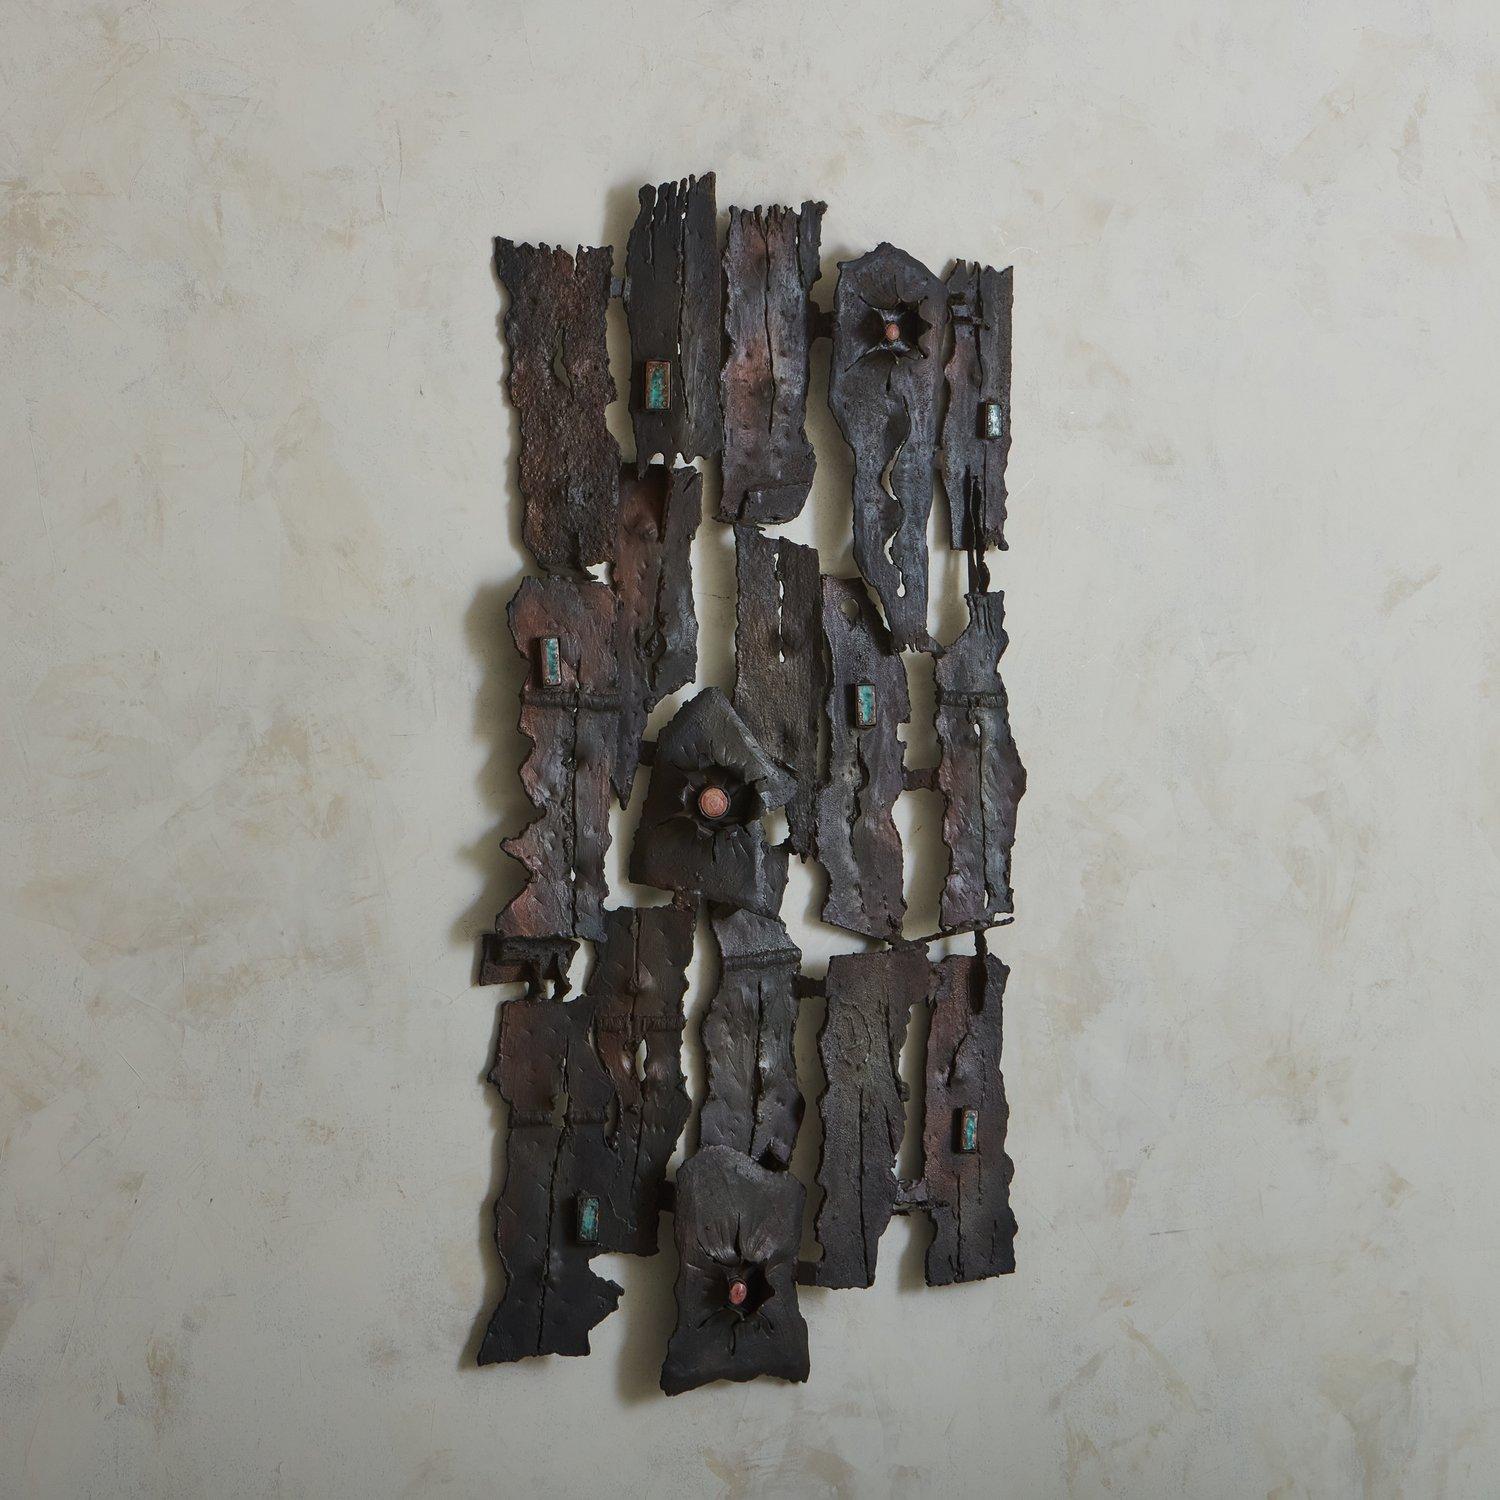 A 1970s French brutalist wall sculpture created with patinated iron. This piece has rich textures and raw edges. It has beautiful inlaid ceramic detailing in pink and blue hues. Unsigned. Sourced in France, 1970s.